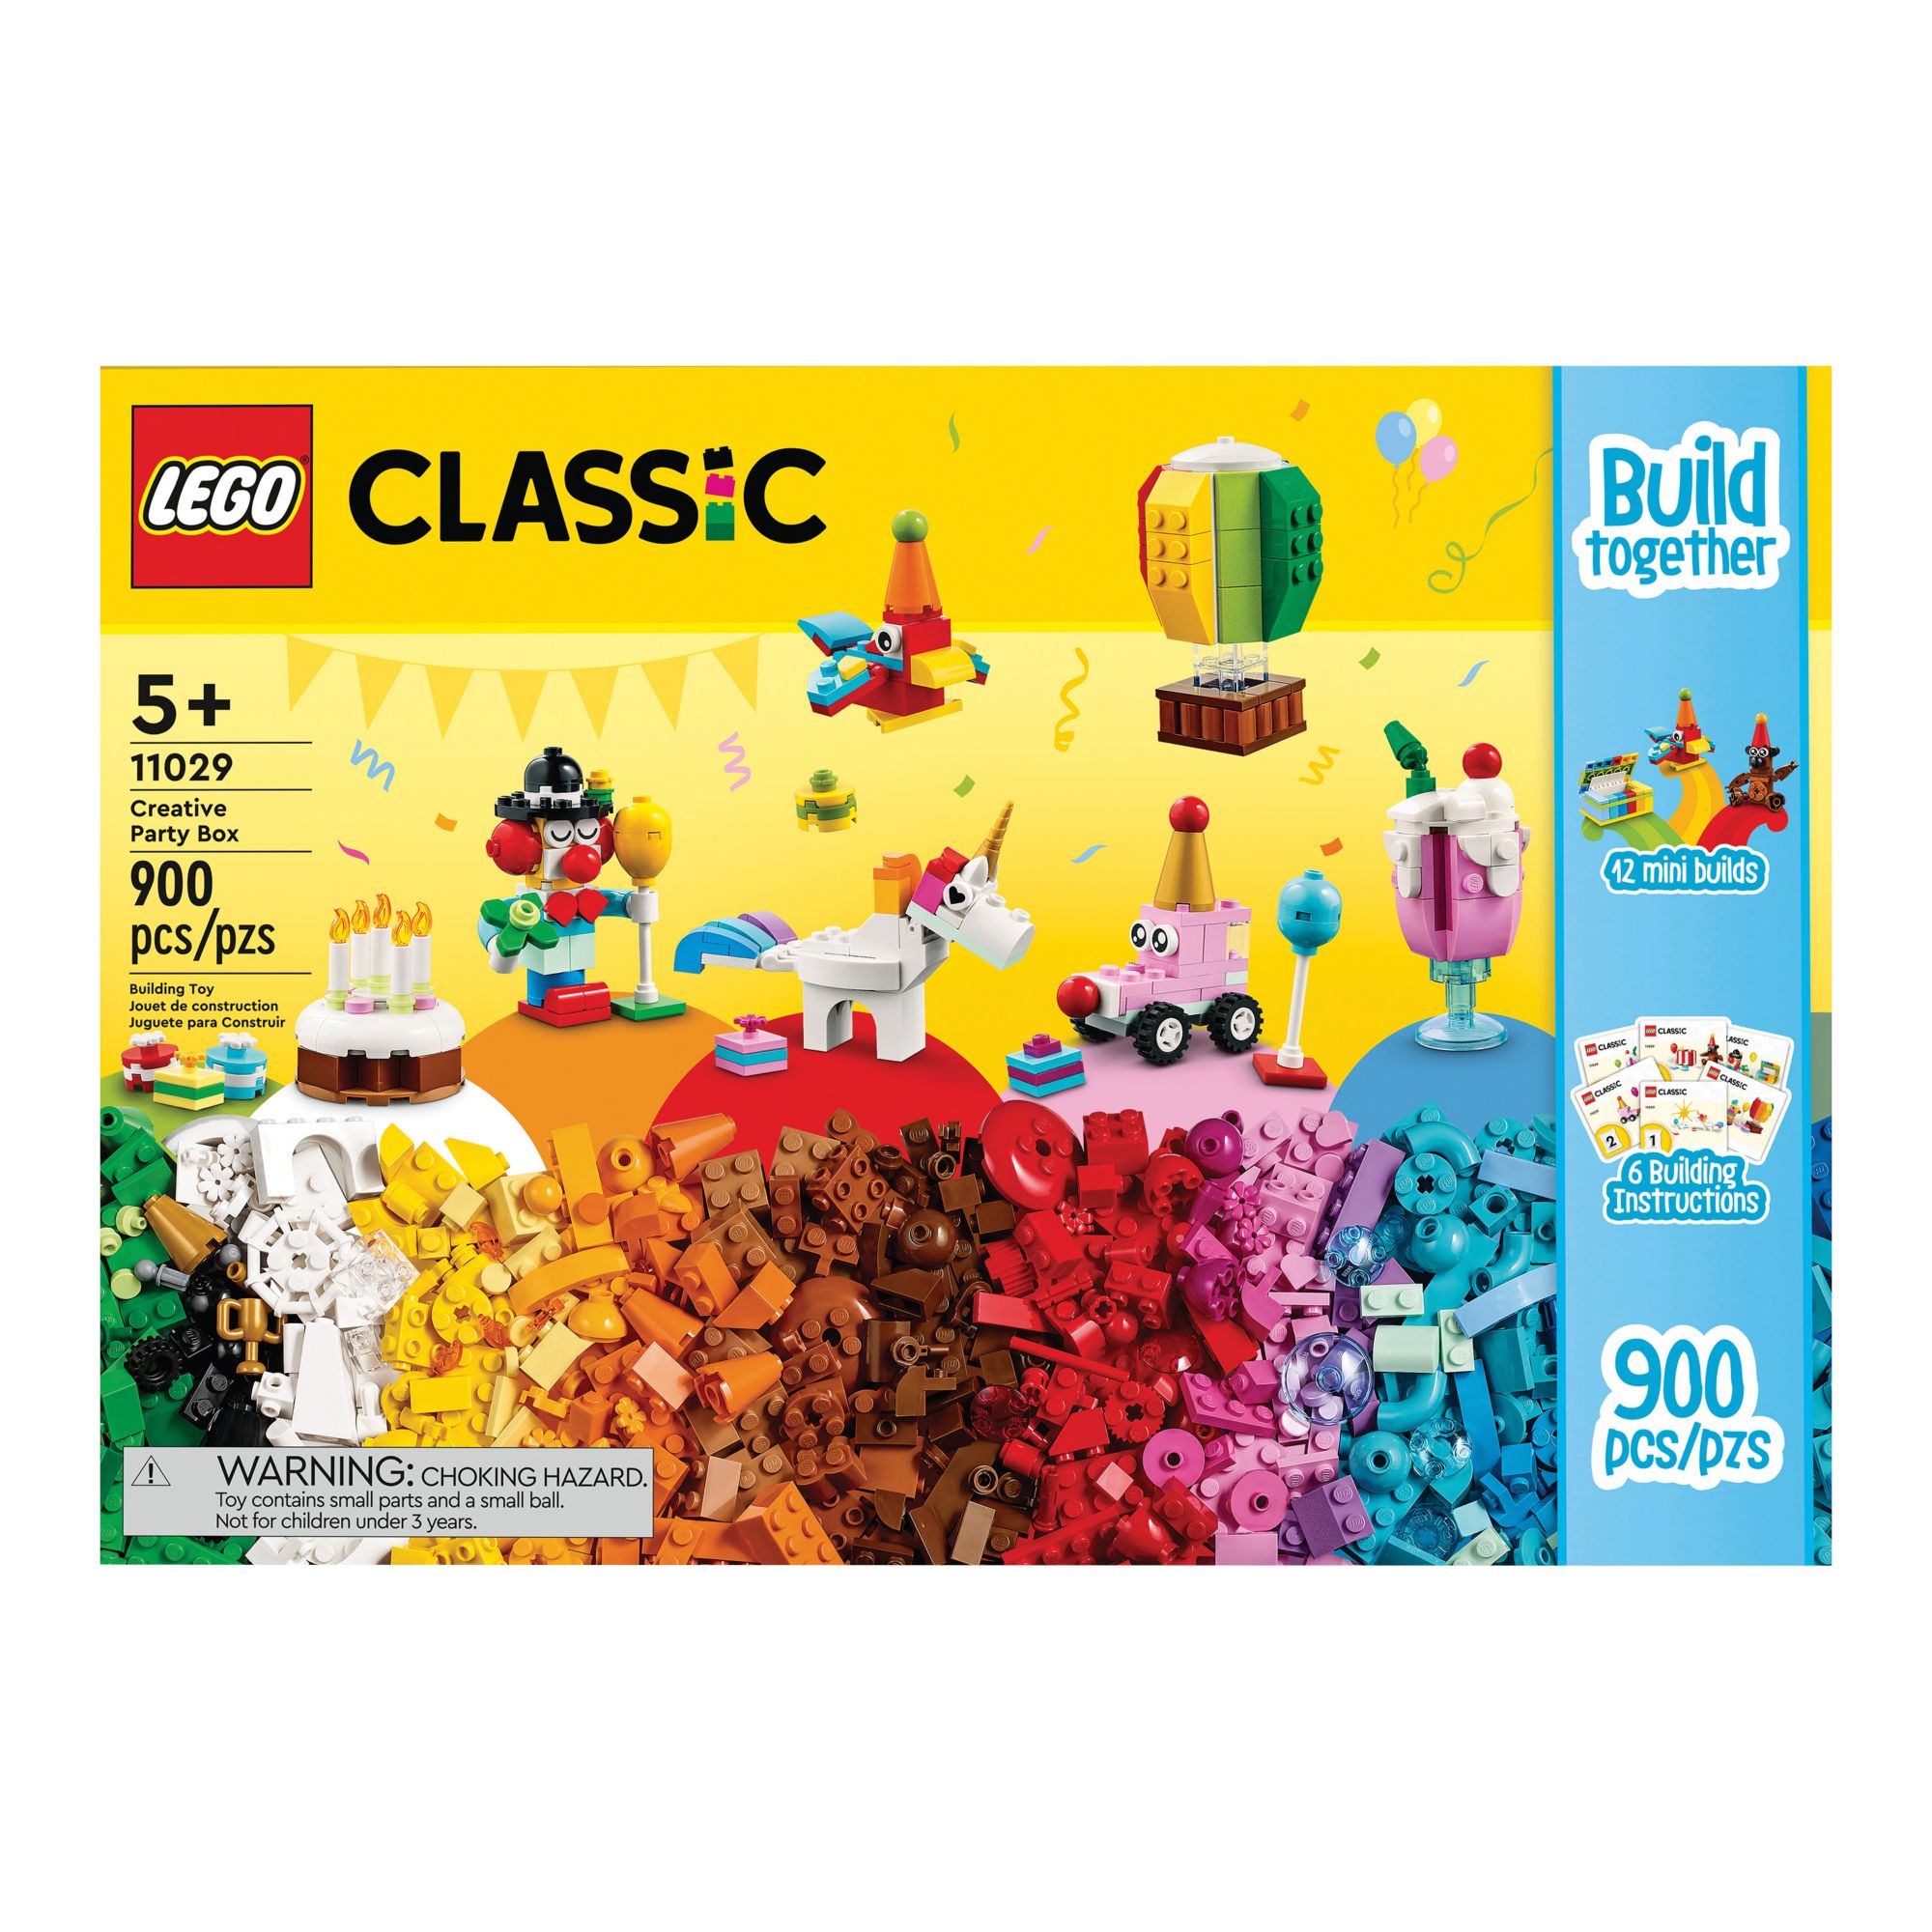 Classic Box – Blue 5006948, Other